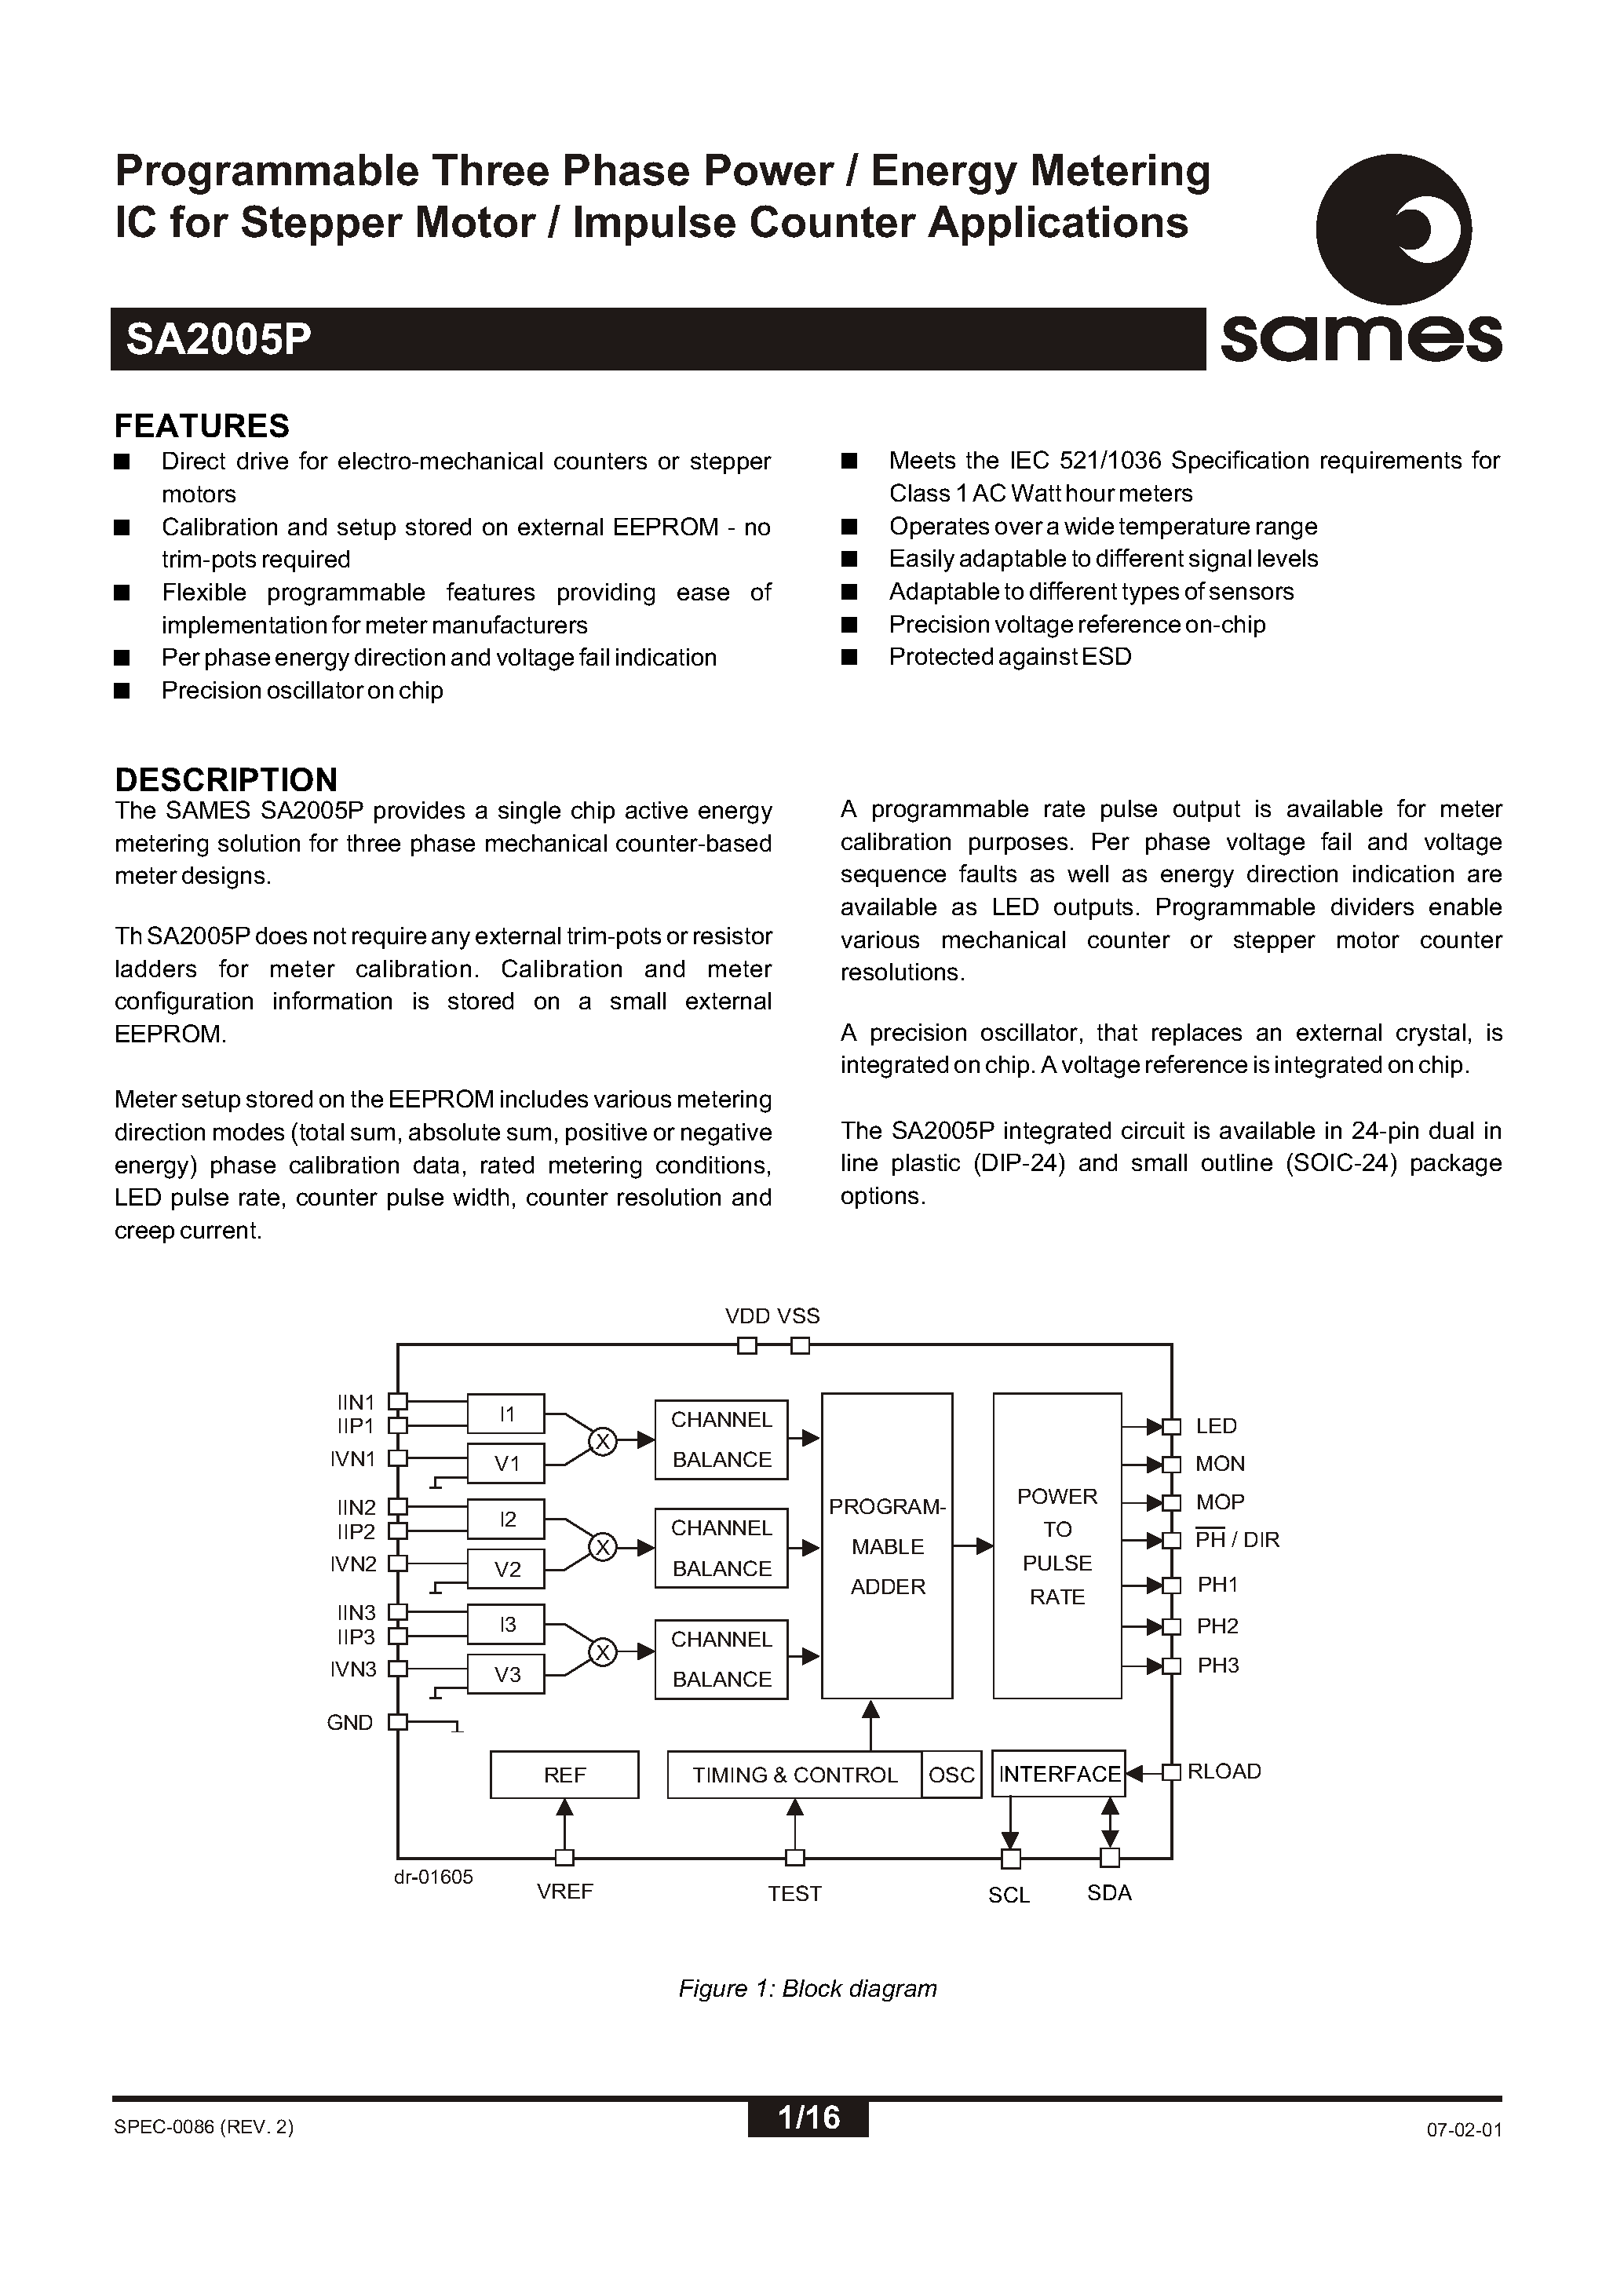 Datasheet SA2005PPA - Programmable Three Phase Power / Energy Metering IC for Stepper Motor / Impulse Counter Applications page 1